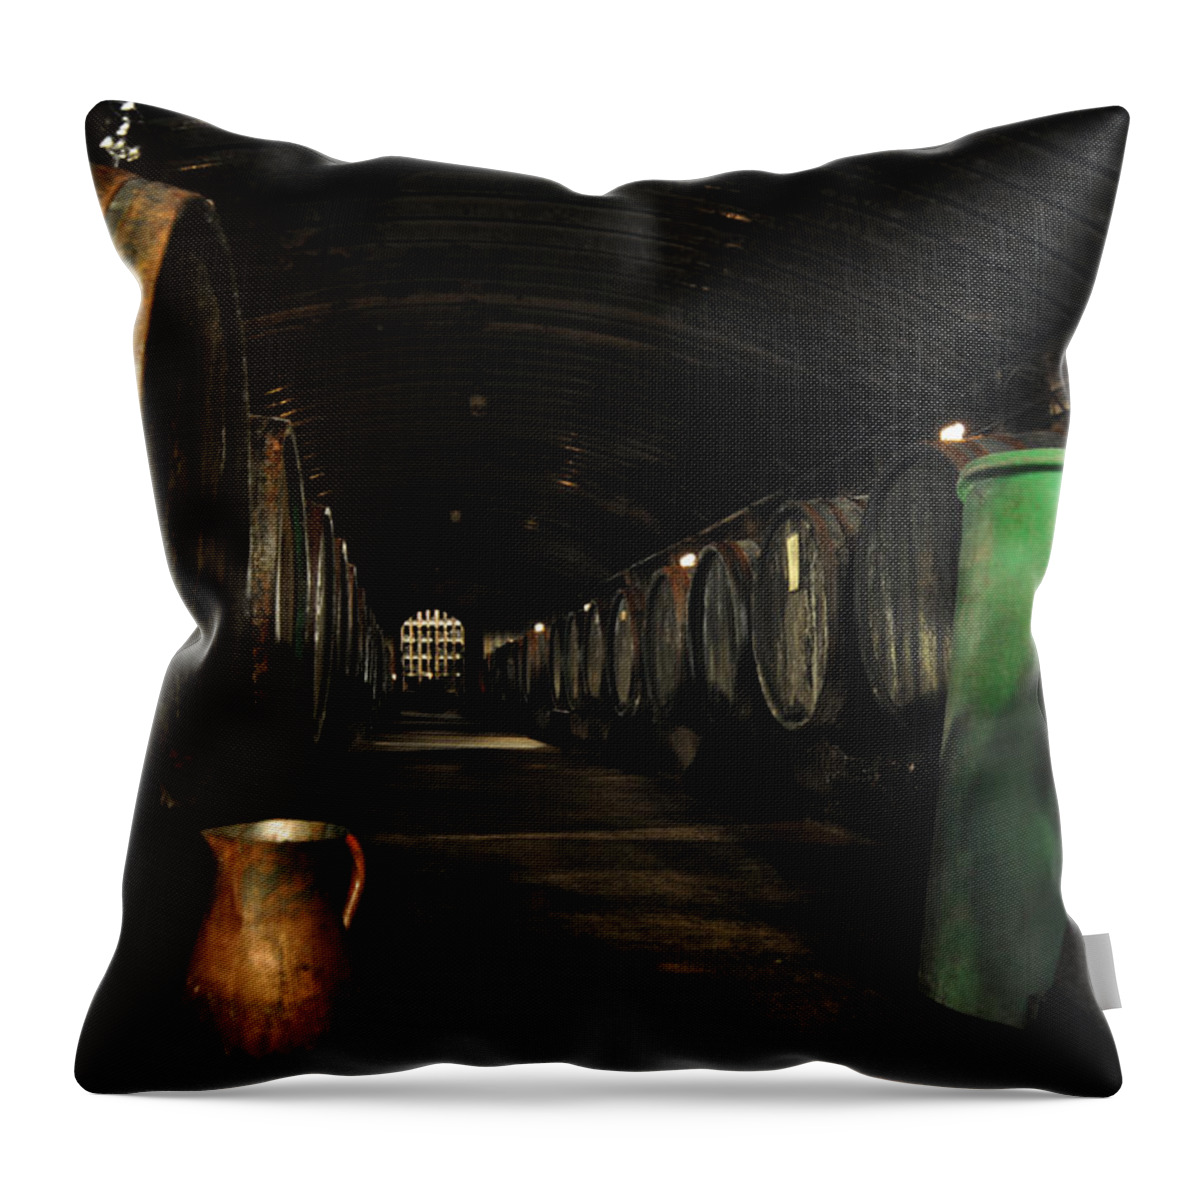 Germany Throw Pillow featuring the photograph Patience Rewarded by Richard Gehlbach